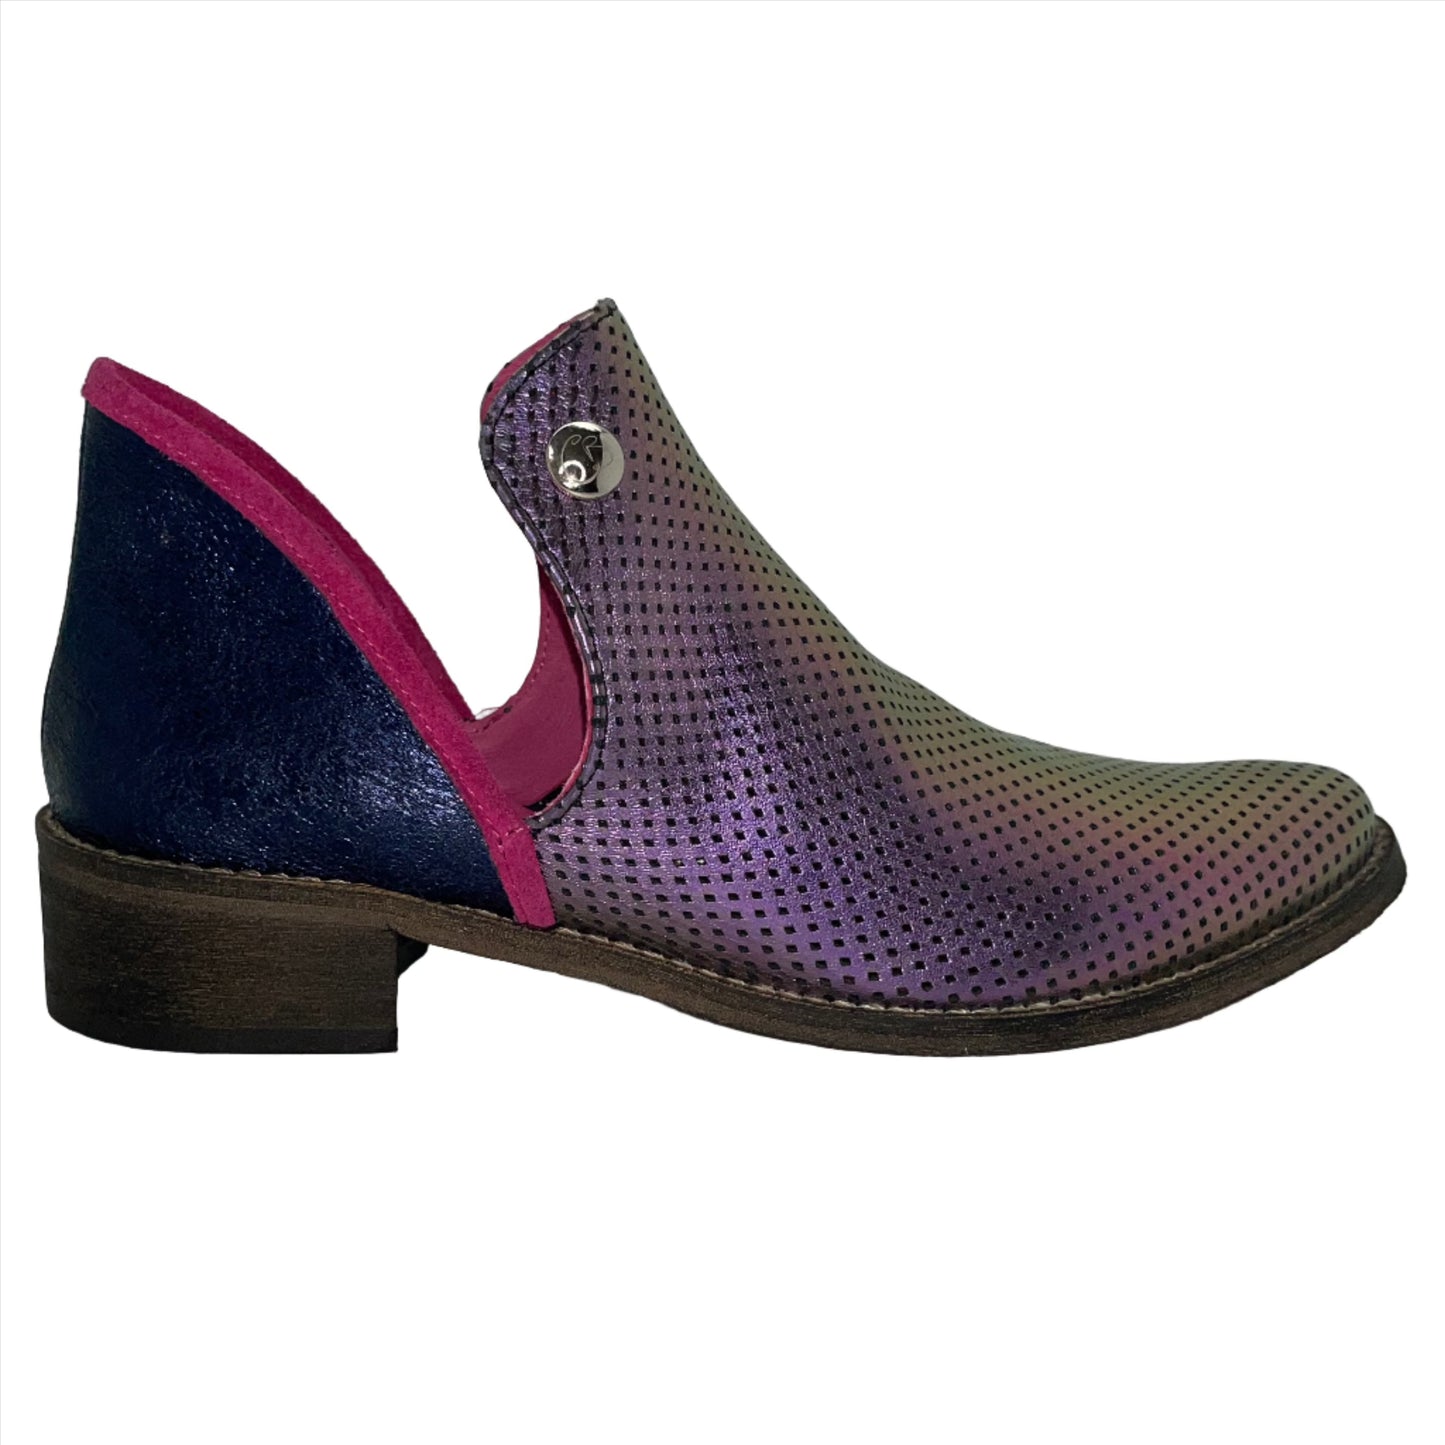 Zippette - Iridescent navy ankle boot